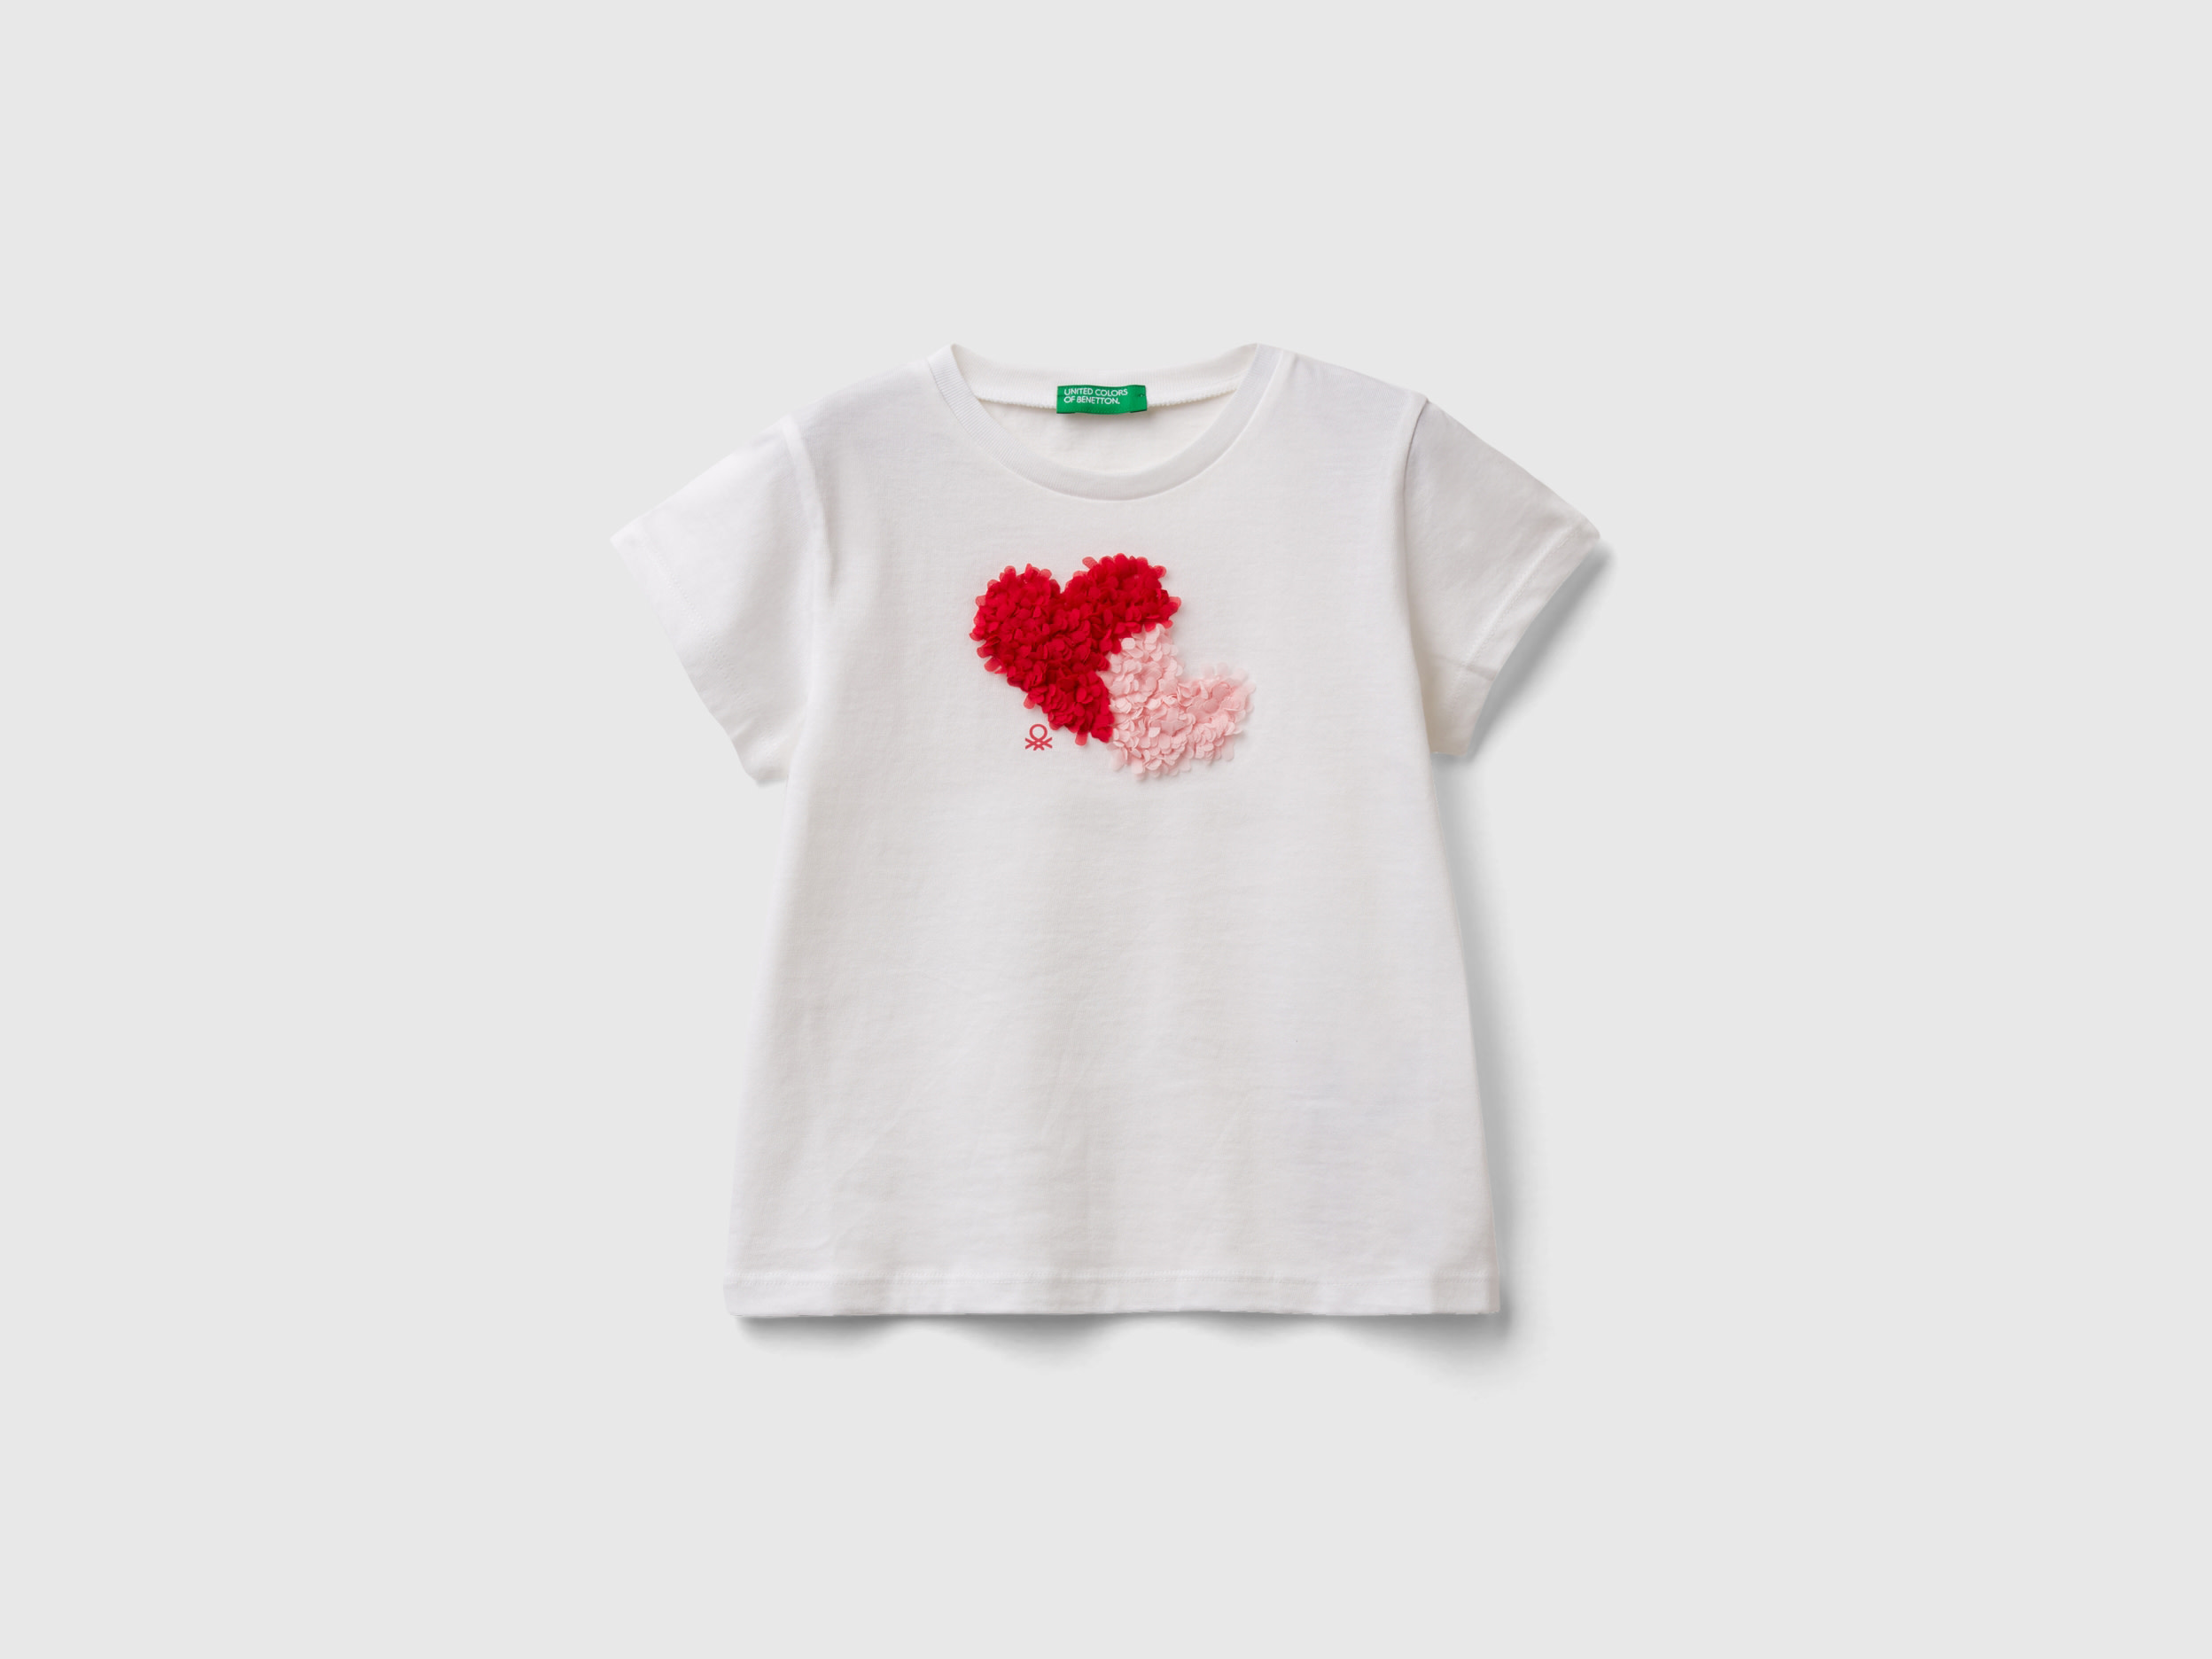 Image of Benetton, T-shirt With Petal Effect Applique, size 90, White, Kids